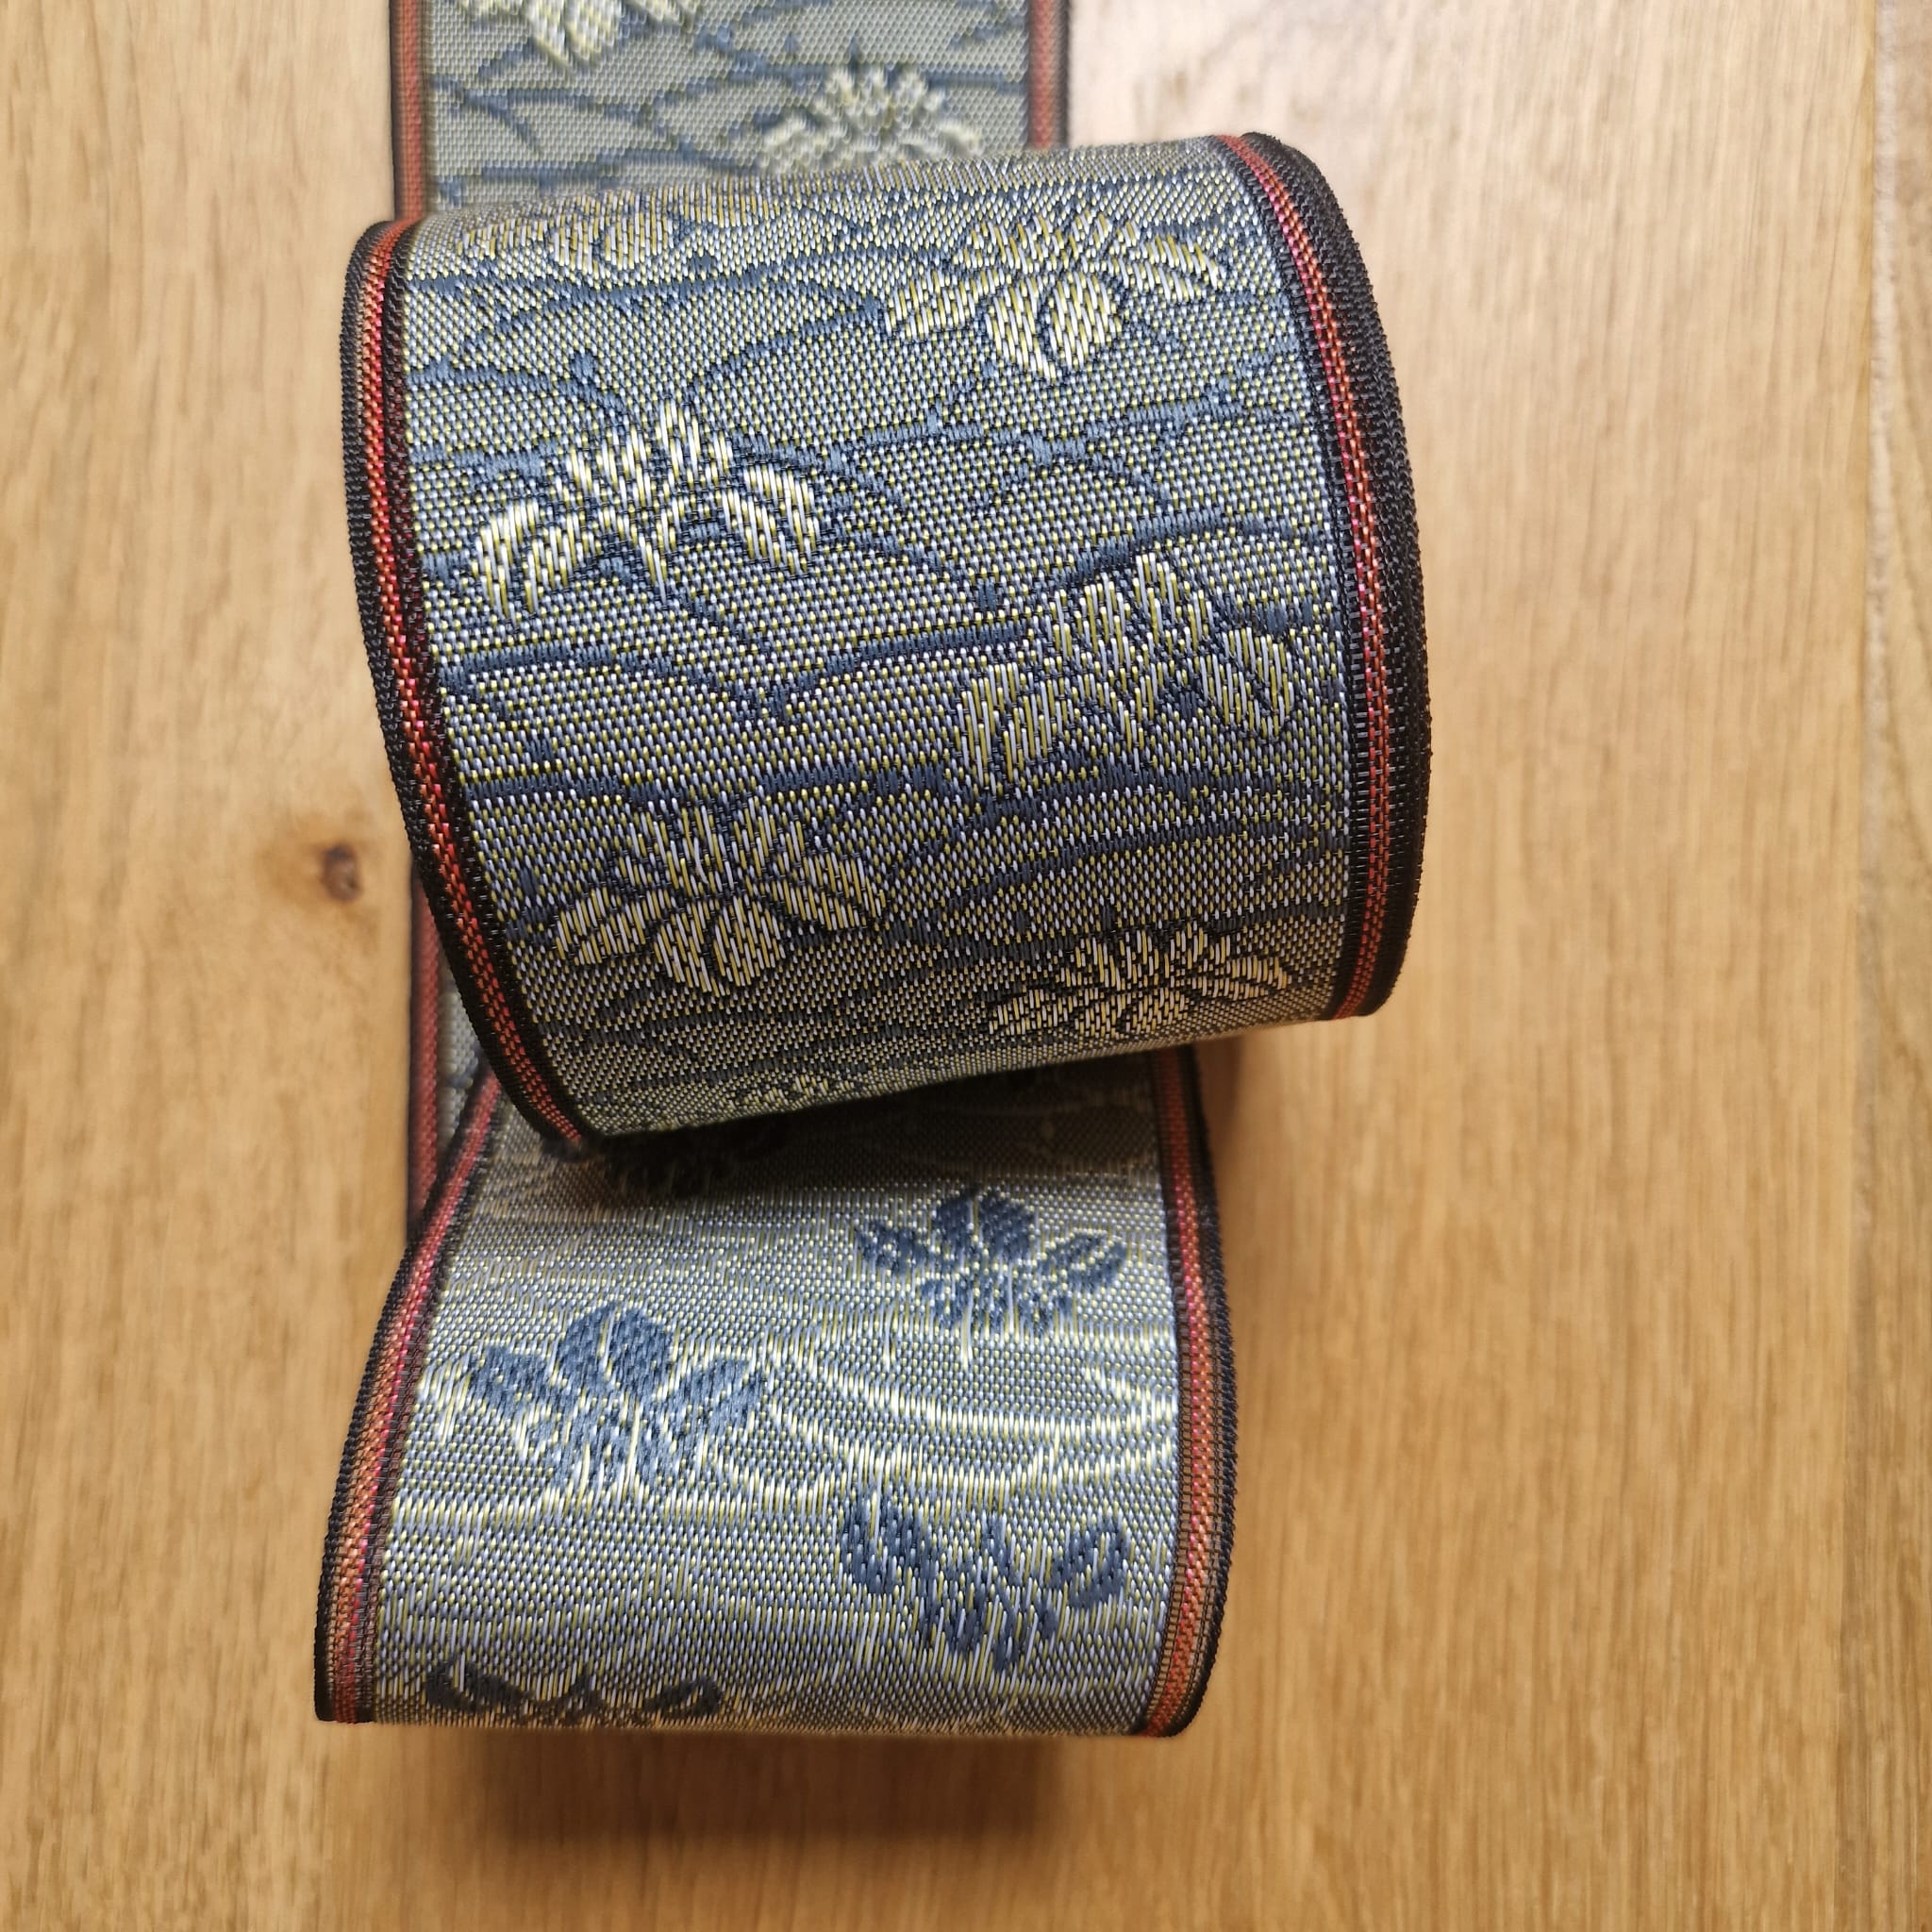 Use our Handmade border and trim for making DIY belt, clutch, purses